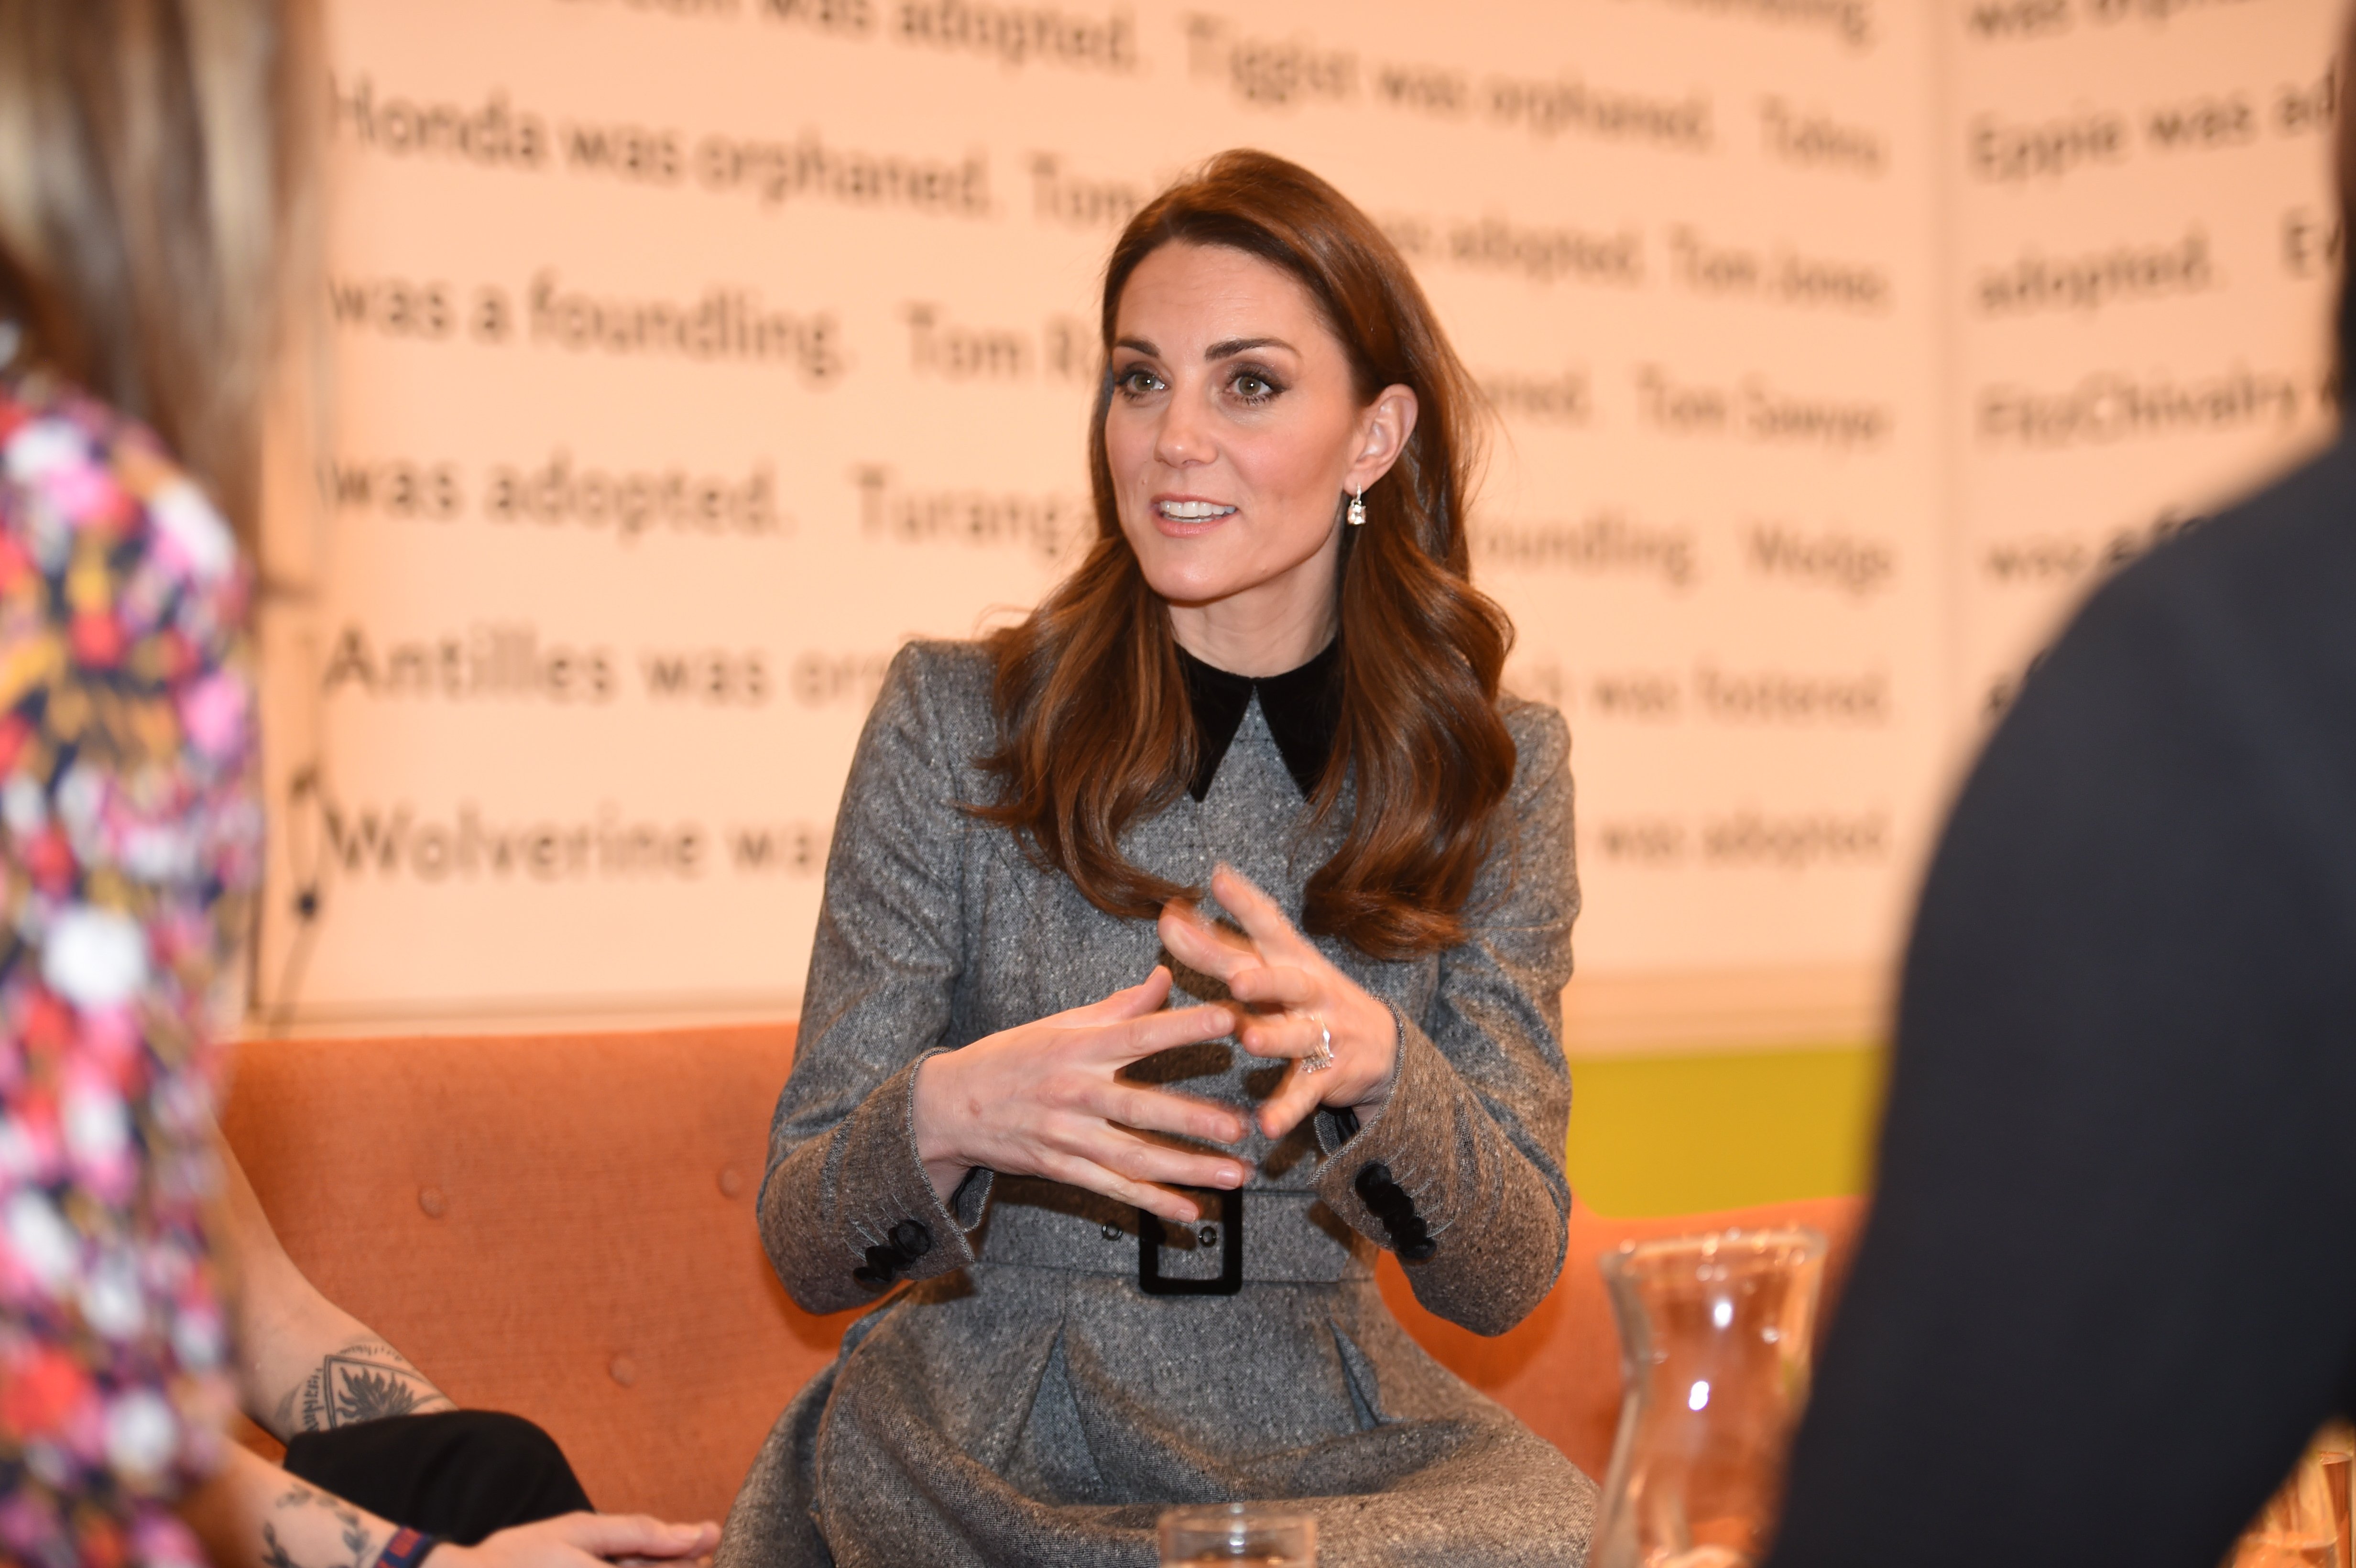 Kate Middleton on a solo engagement at the Foundling Museum on March 19, 2019 | Photo: Getty Images